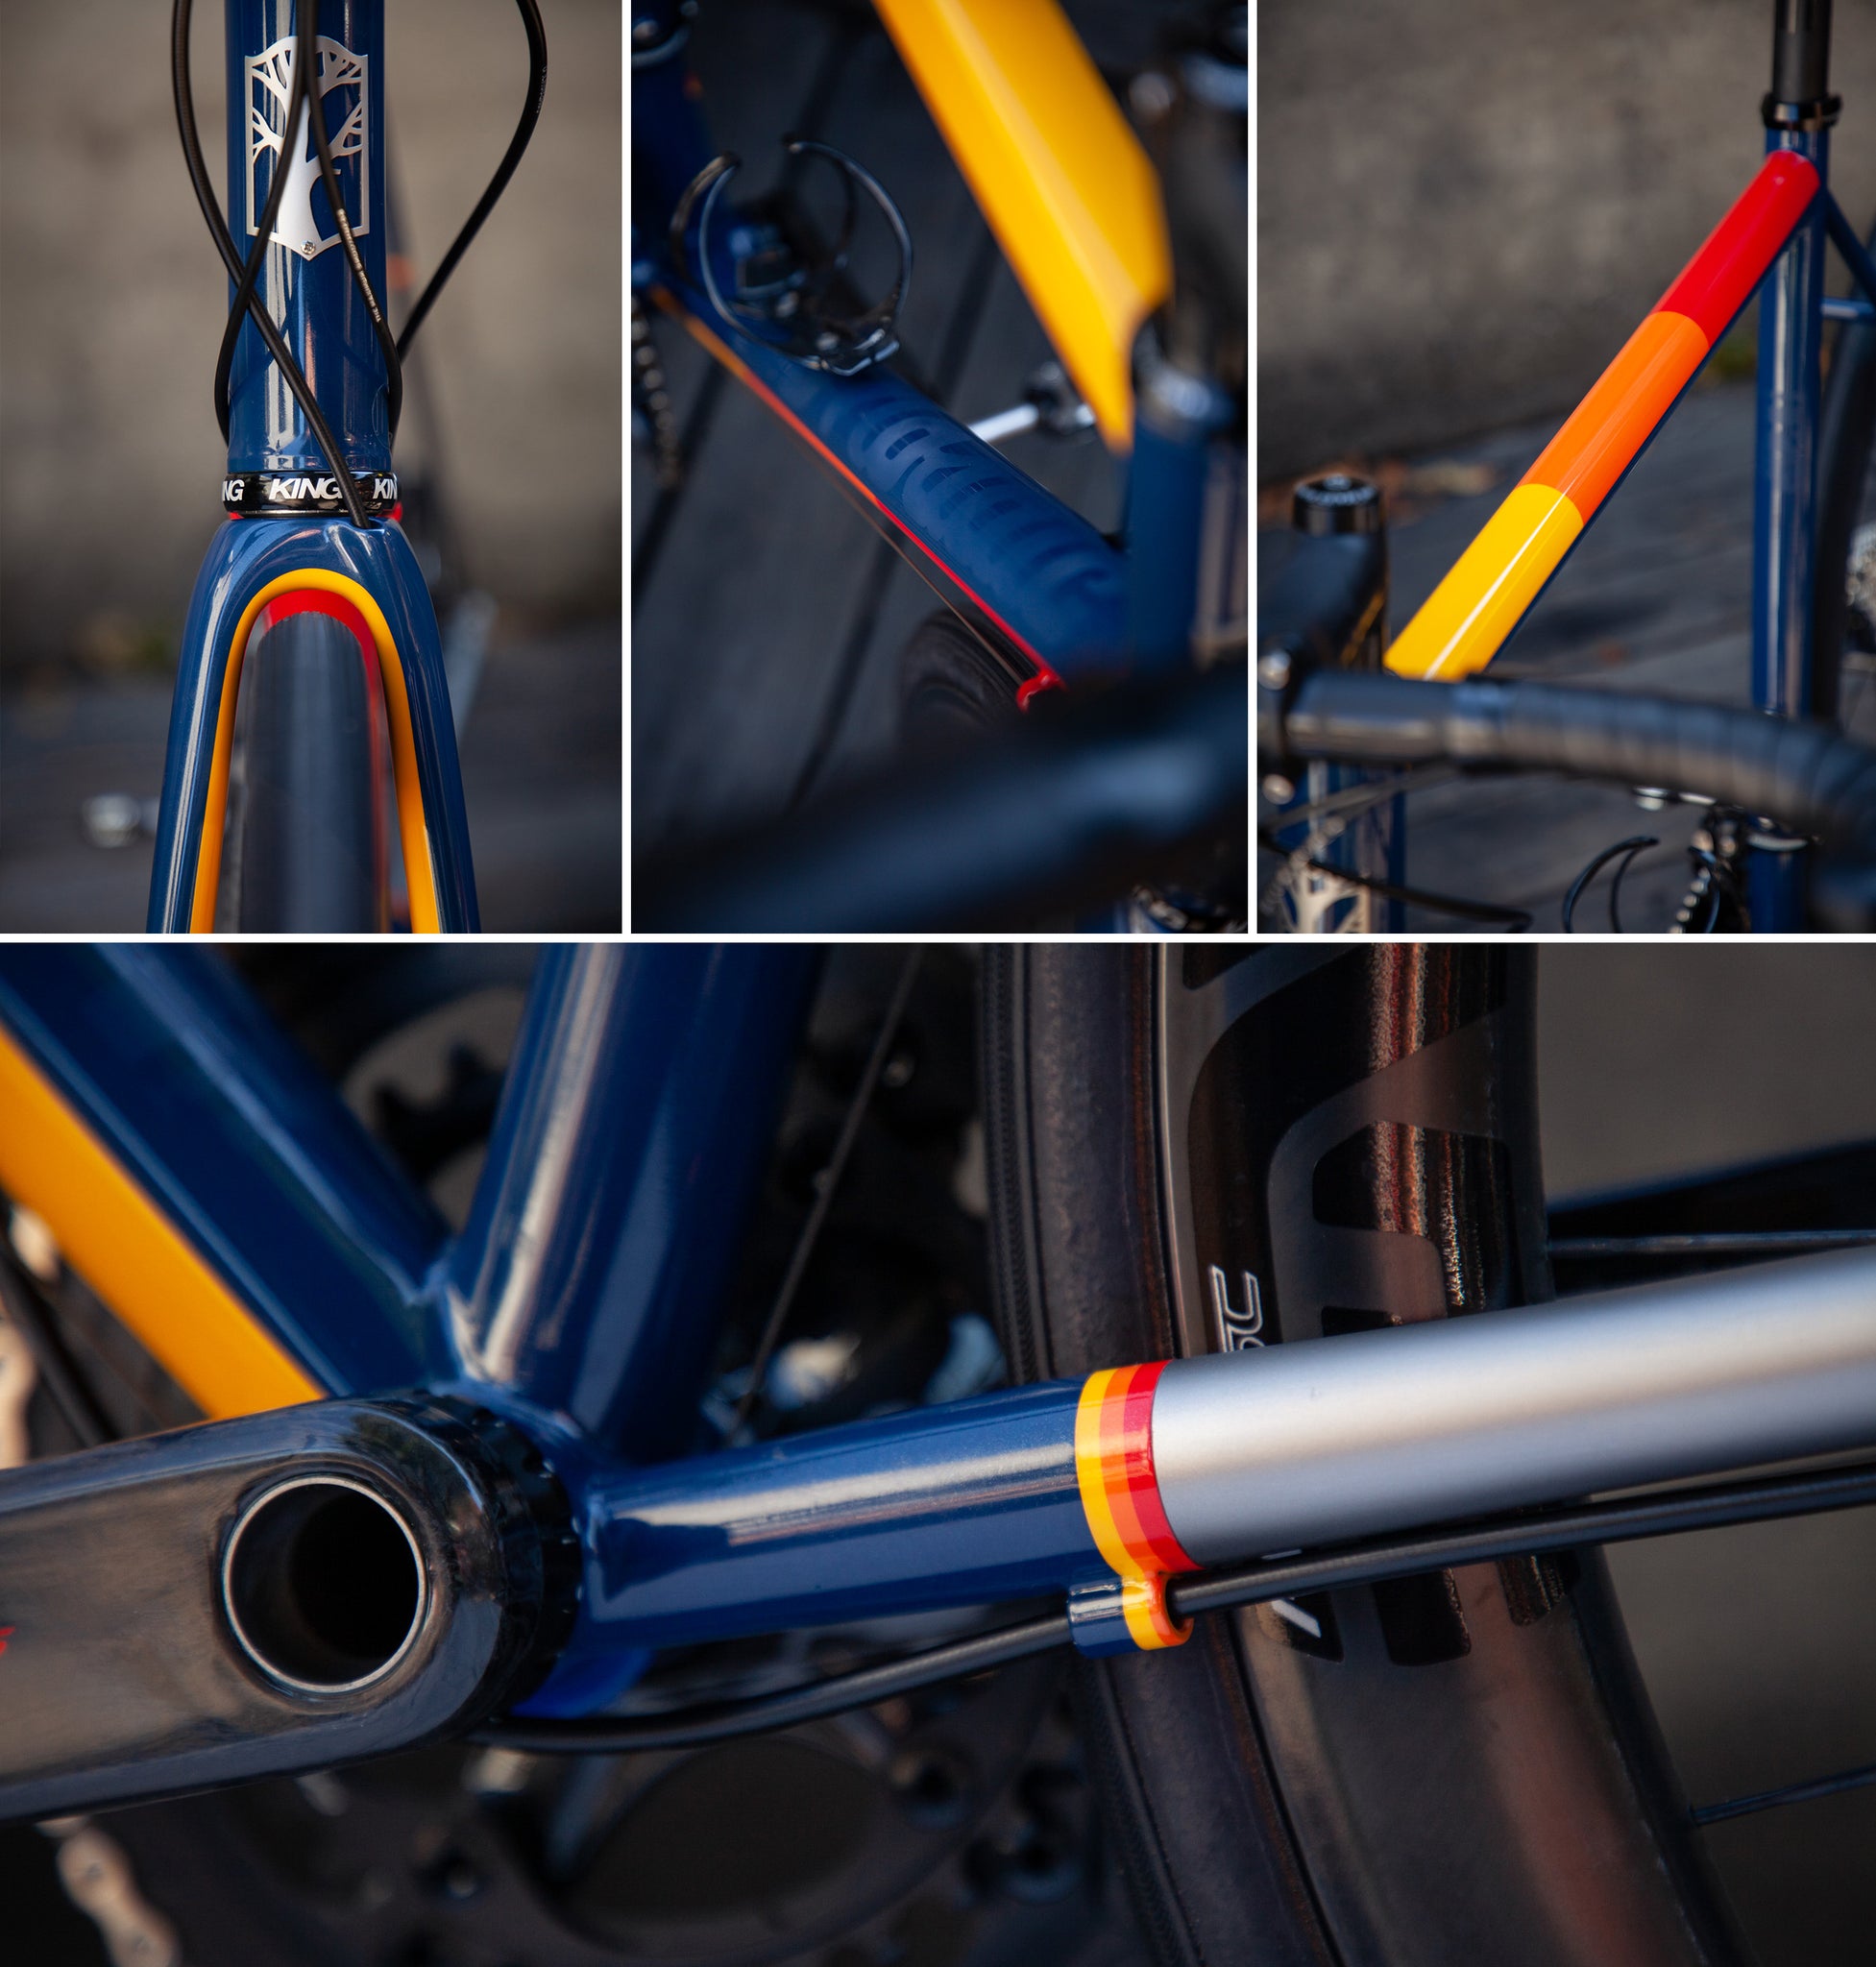 mosaic rt-1 frame and paint details